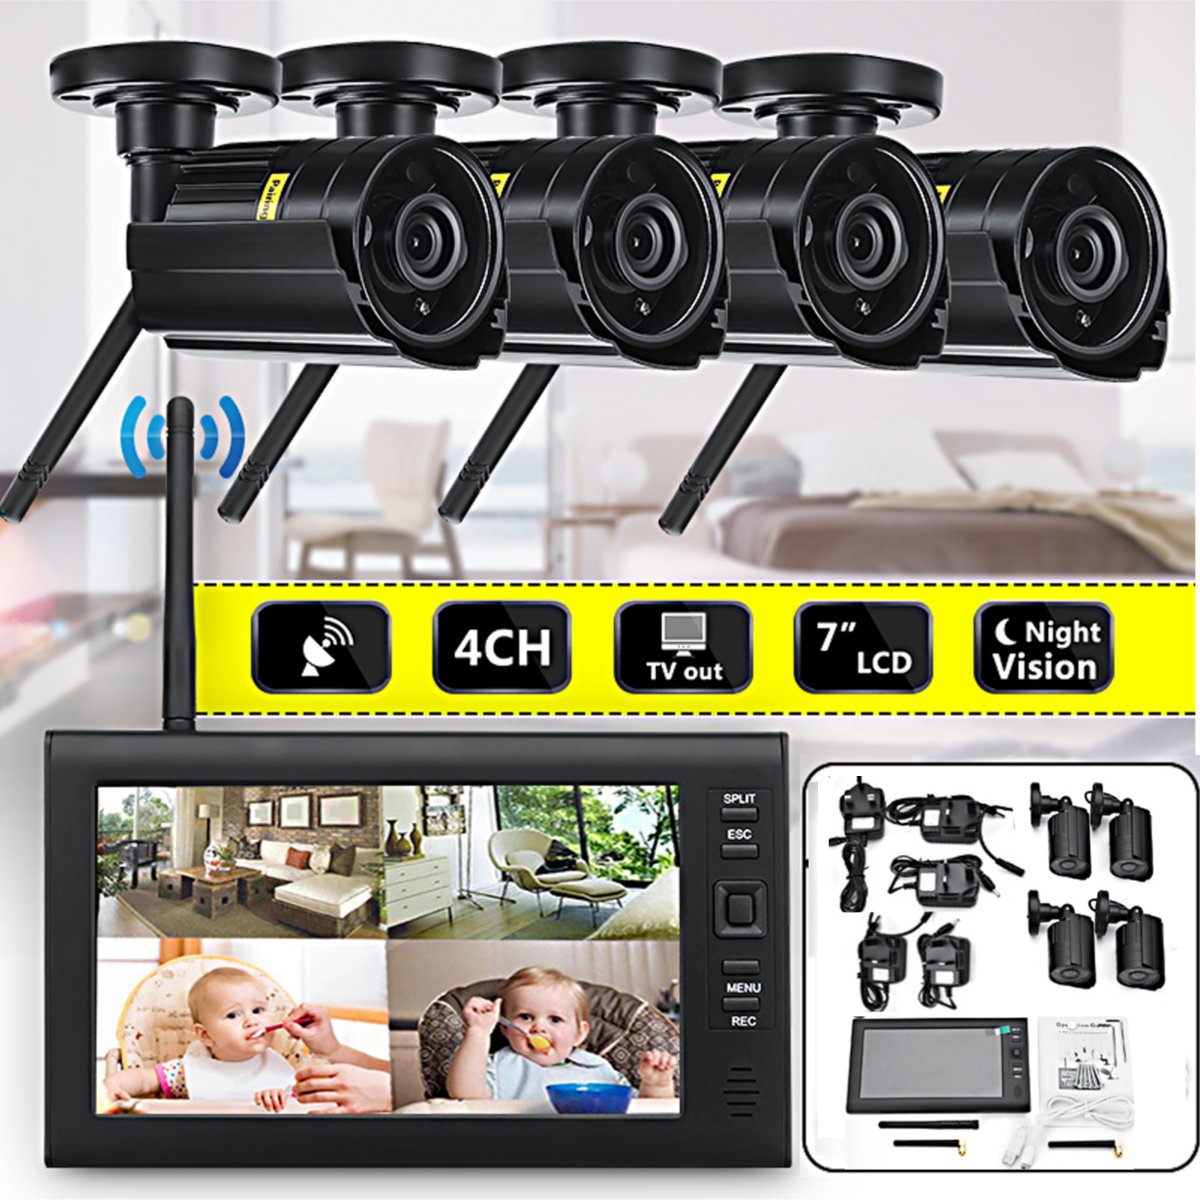 4Pcs-Digital-Wireless-CCTV-Camera-Waterproof-7inch-LCD-Monitor-DVR-Record-Home-Security-System-1448127